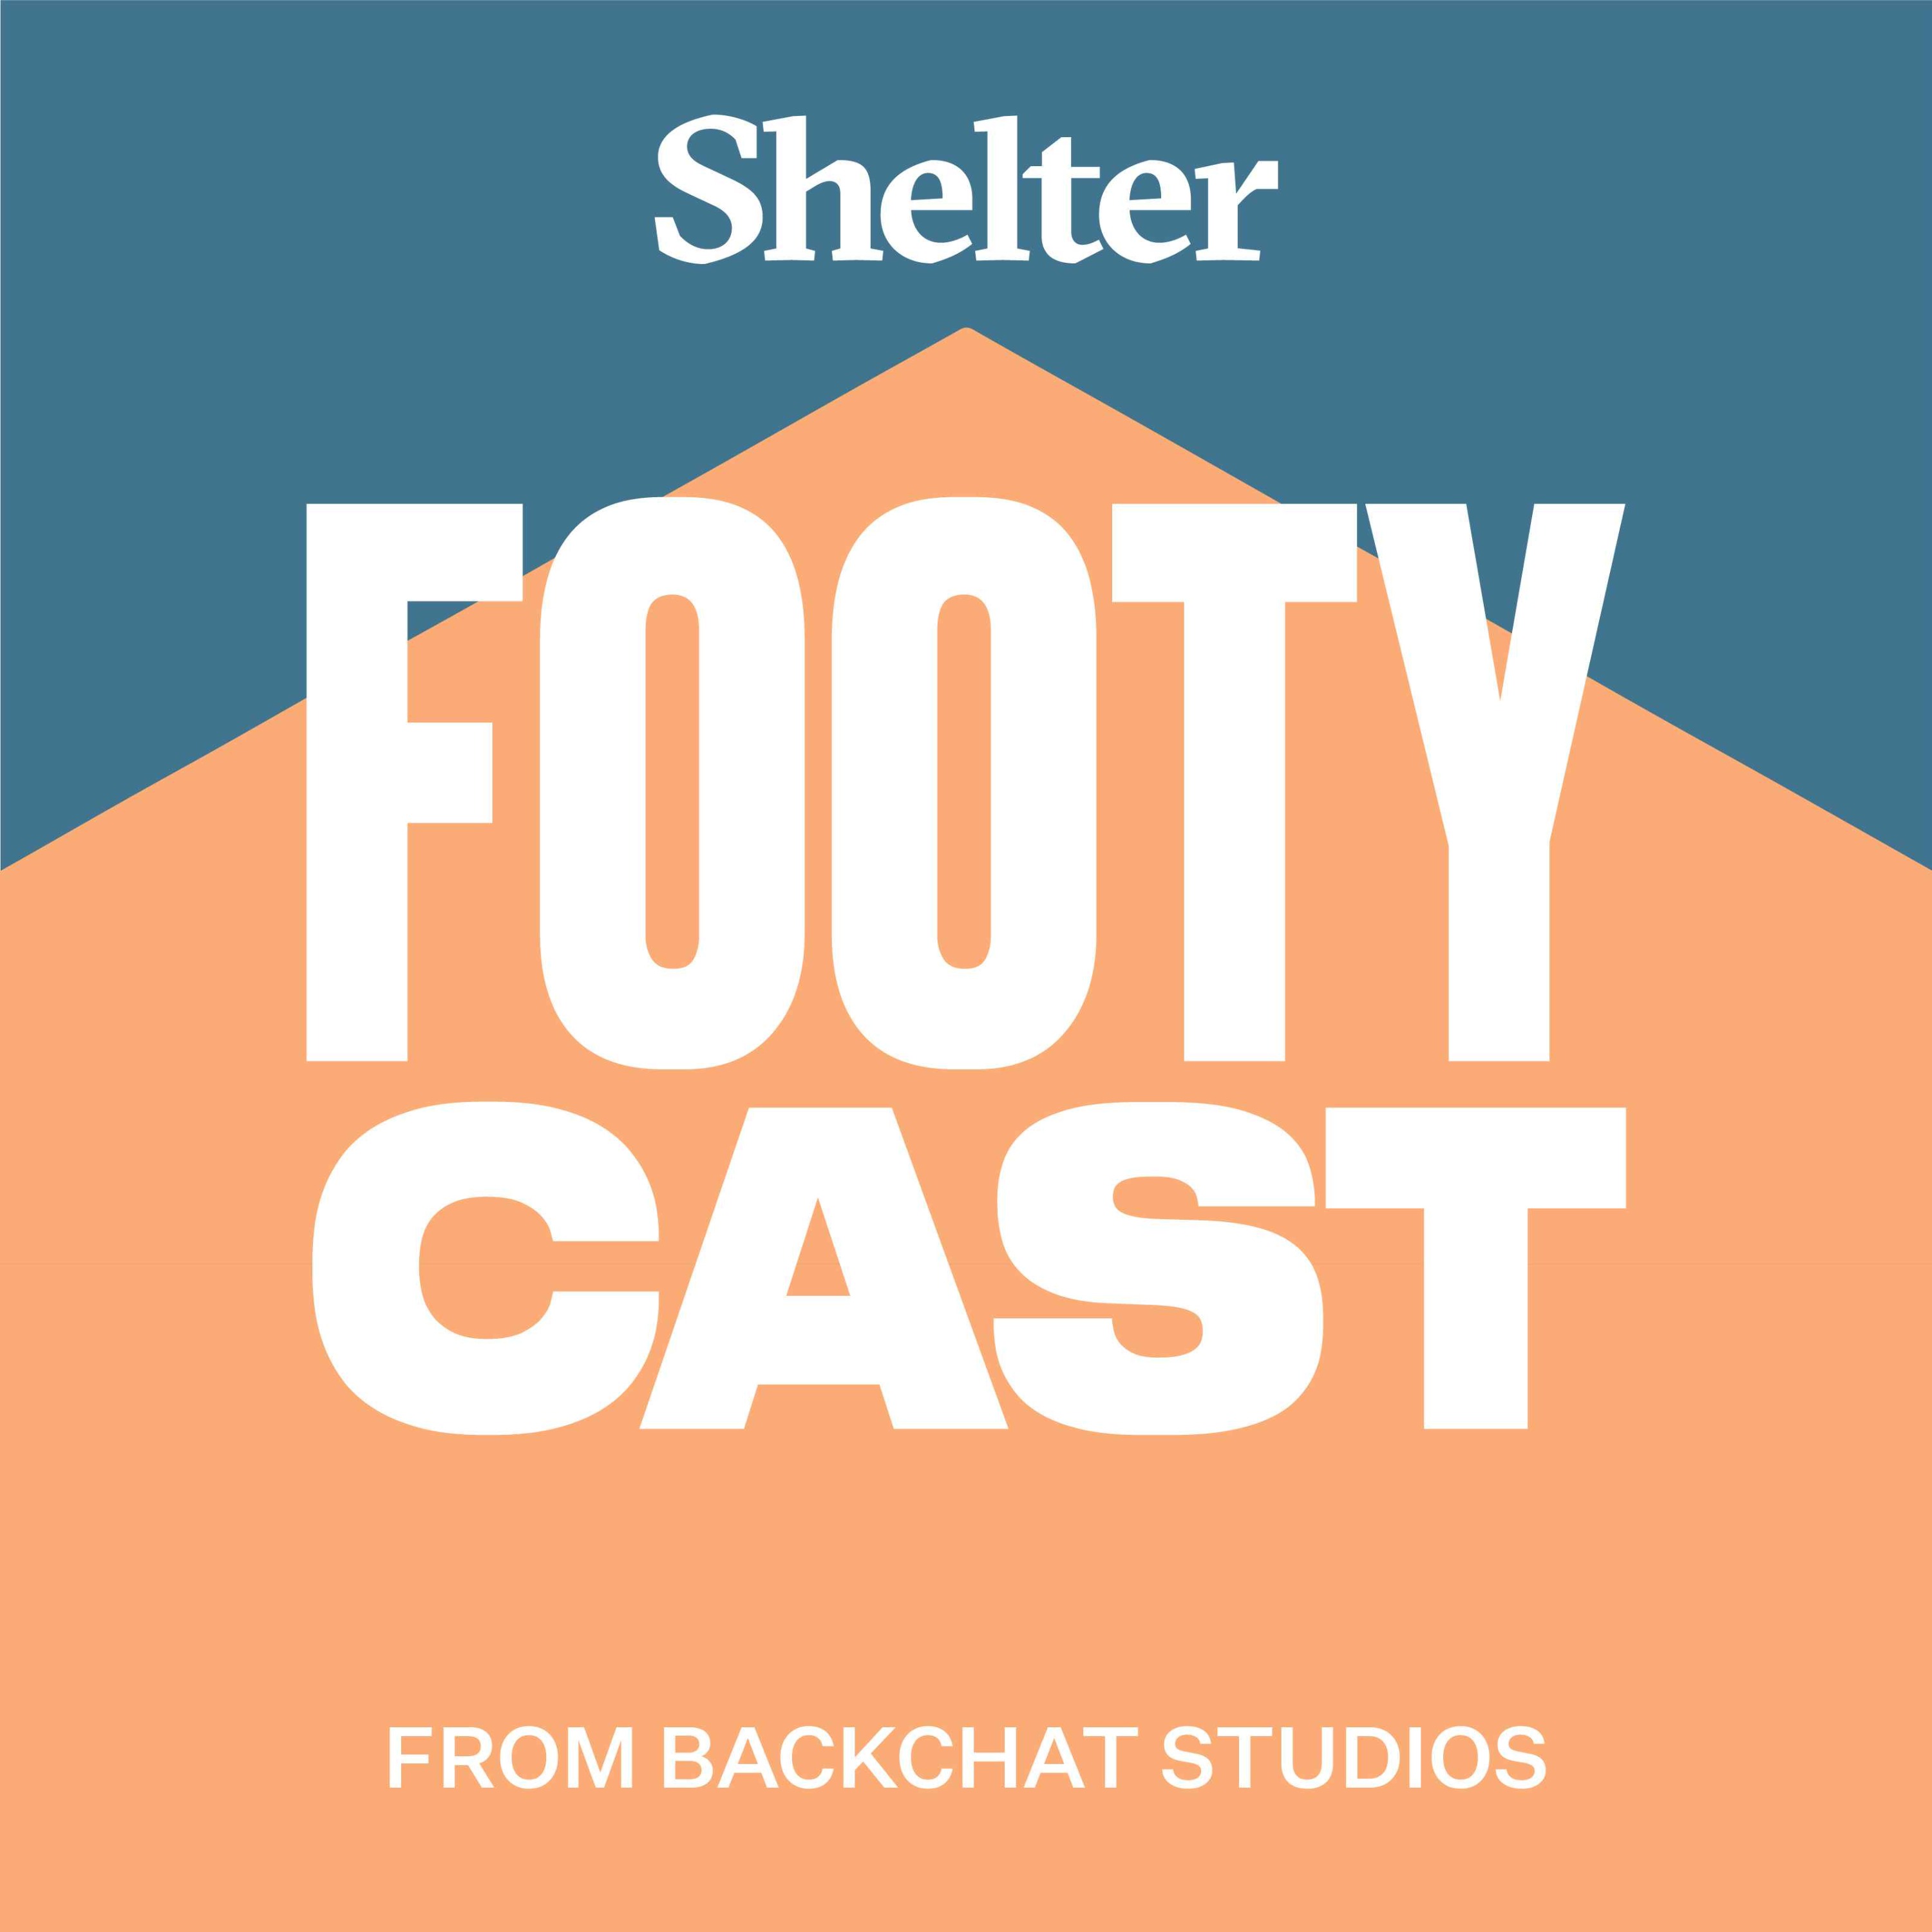 Shelter FootyCast No AFL? What now?